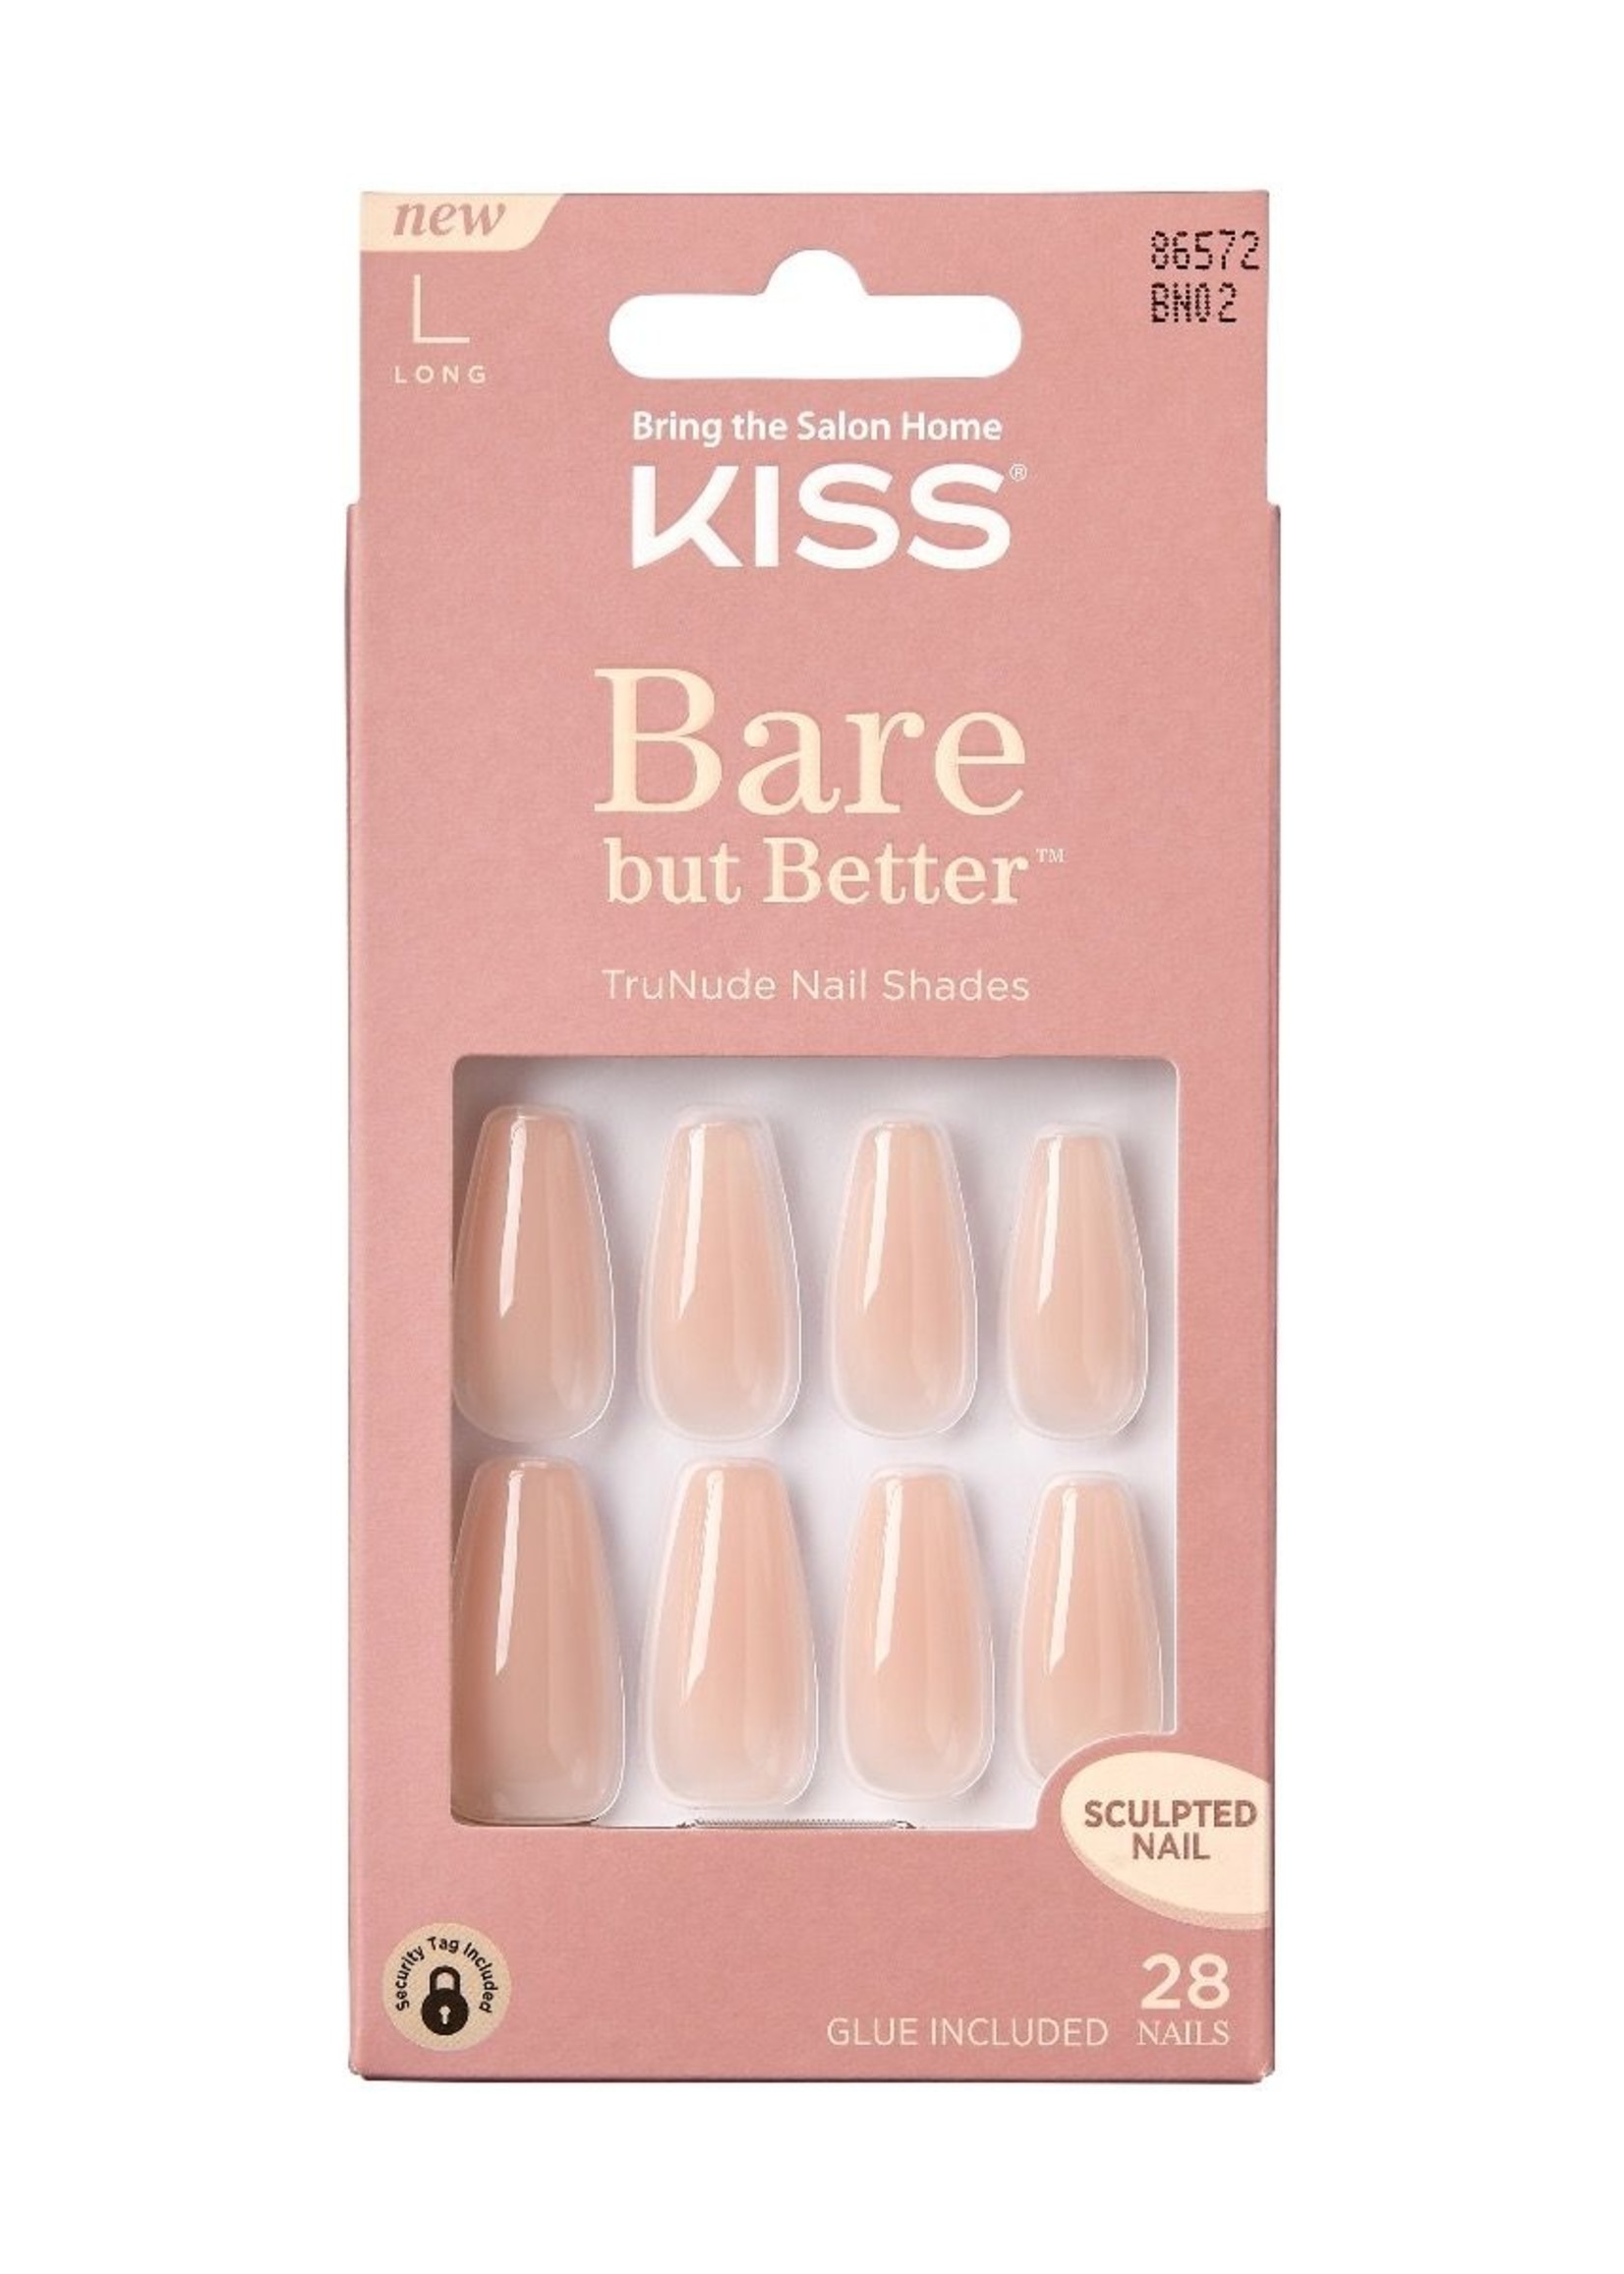 KISS Bare But Better Nails